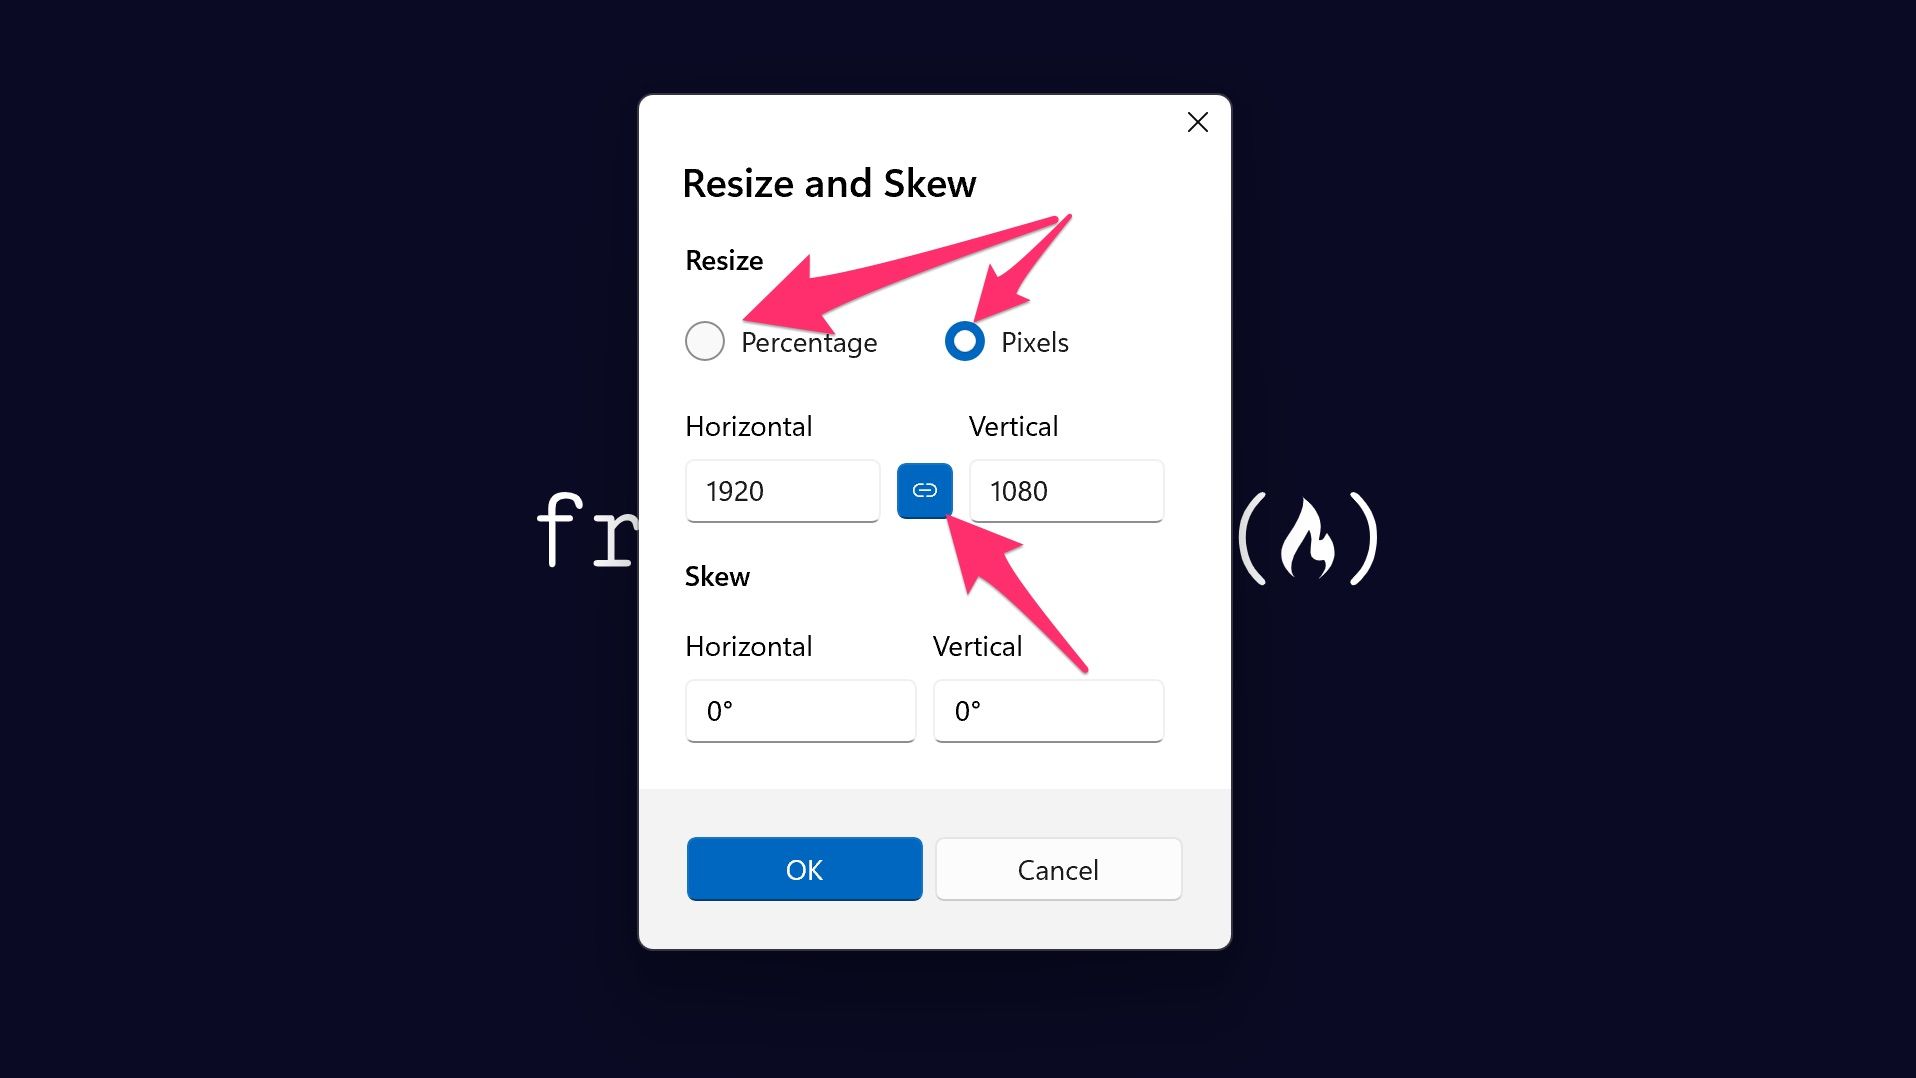 Microsoft Paint's "Resize and Skew" dialog box